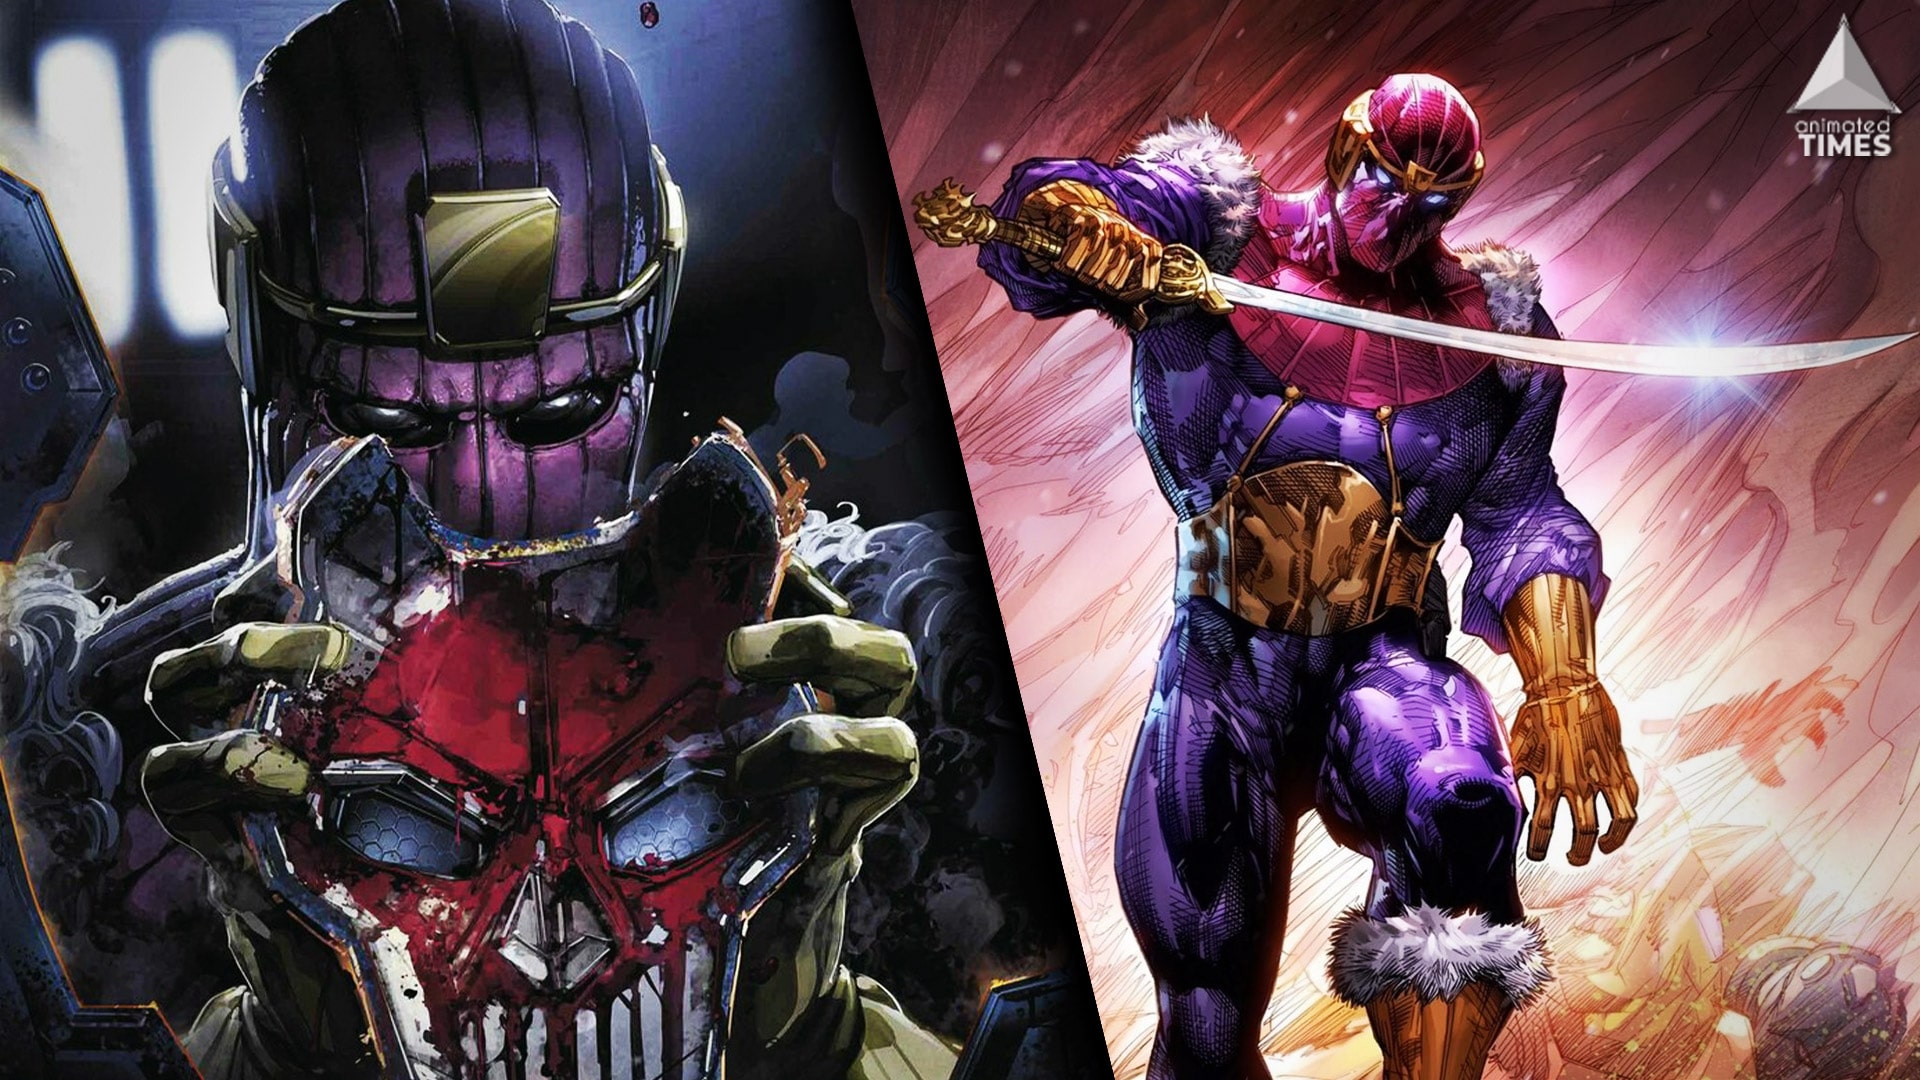 Falcon And The Winter Soldier: Facts To Know About The Villainous Baron Zemo